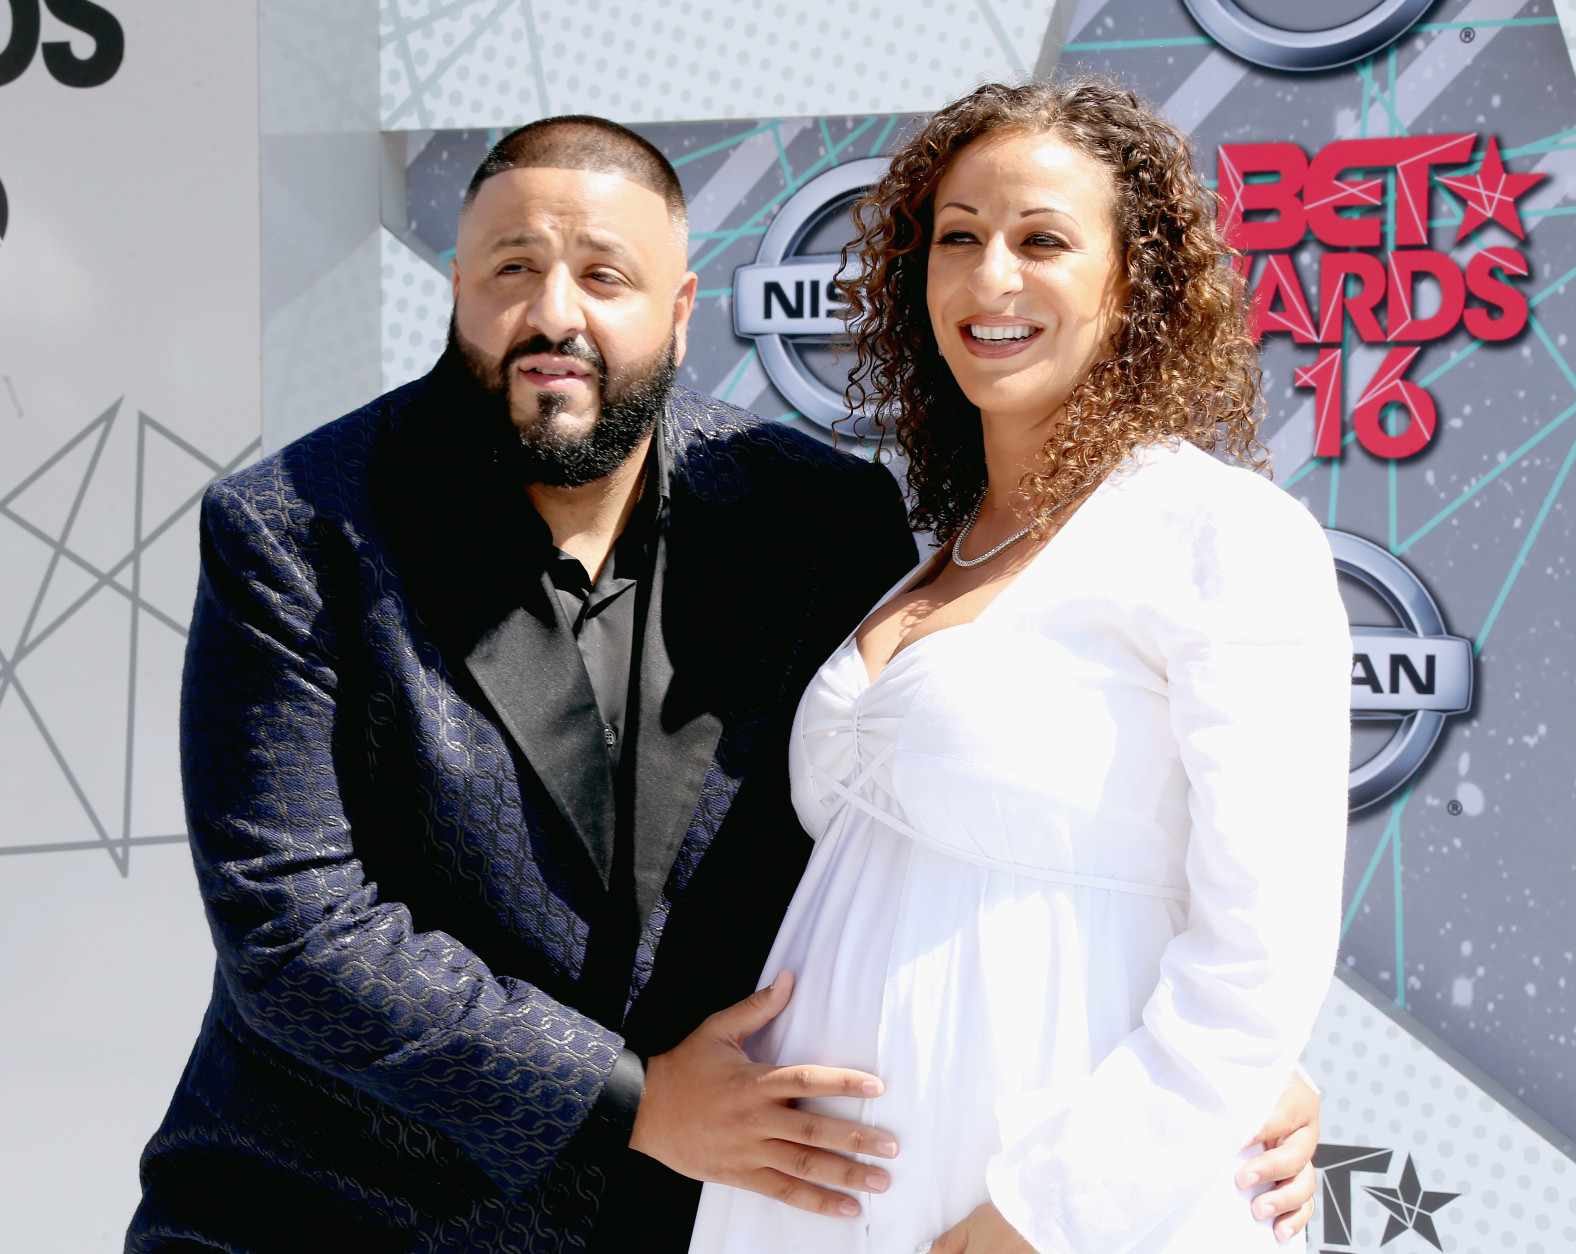 LOS ANGELES, CA - JUNE 26:  DJ Khaled and Nicole Tuck attend the 2016 BET Awards at the Microsoft Theater on June 26, 2016 in Los Angeles, California.  (Photo by Frederick M. Brown/Getty Images)